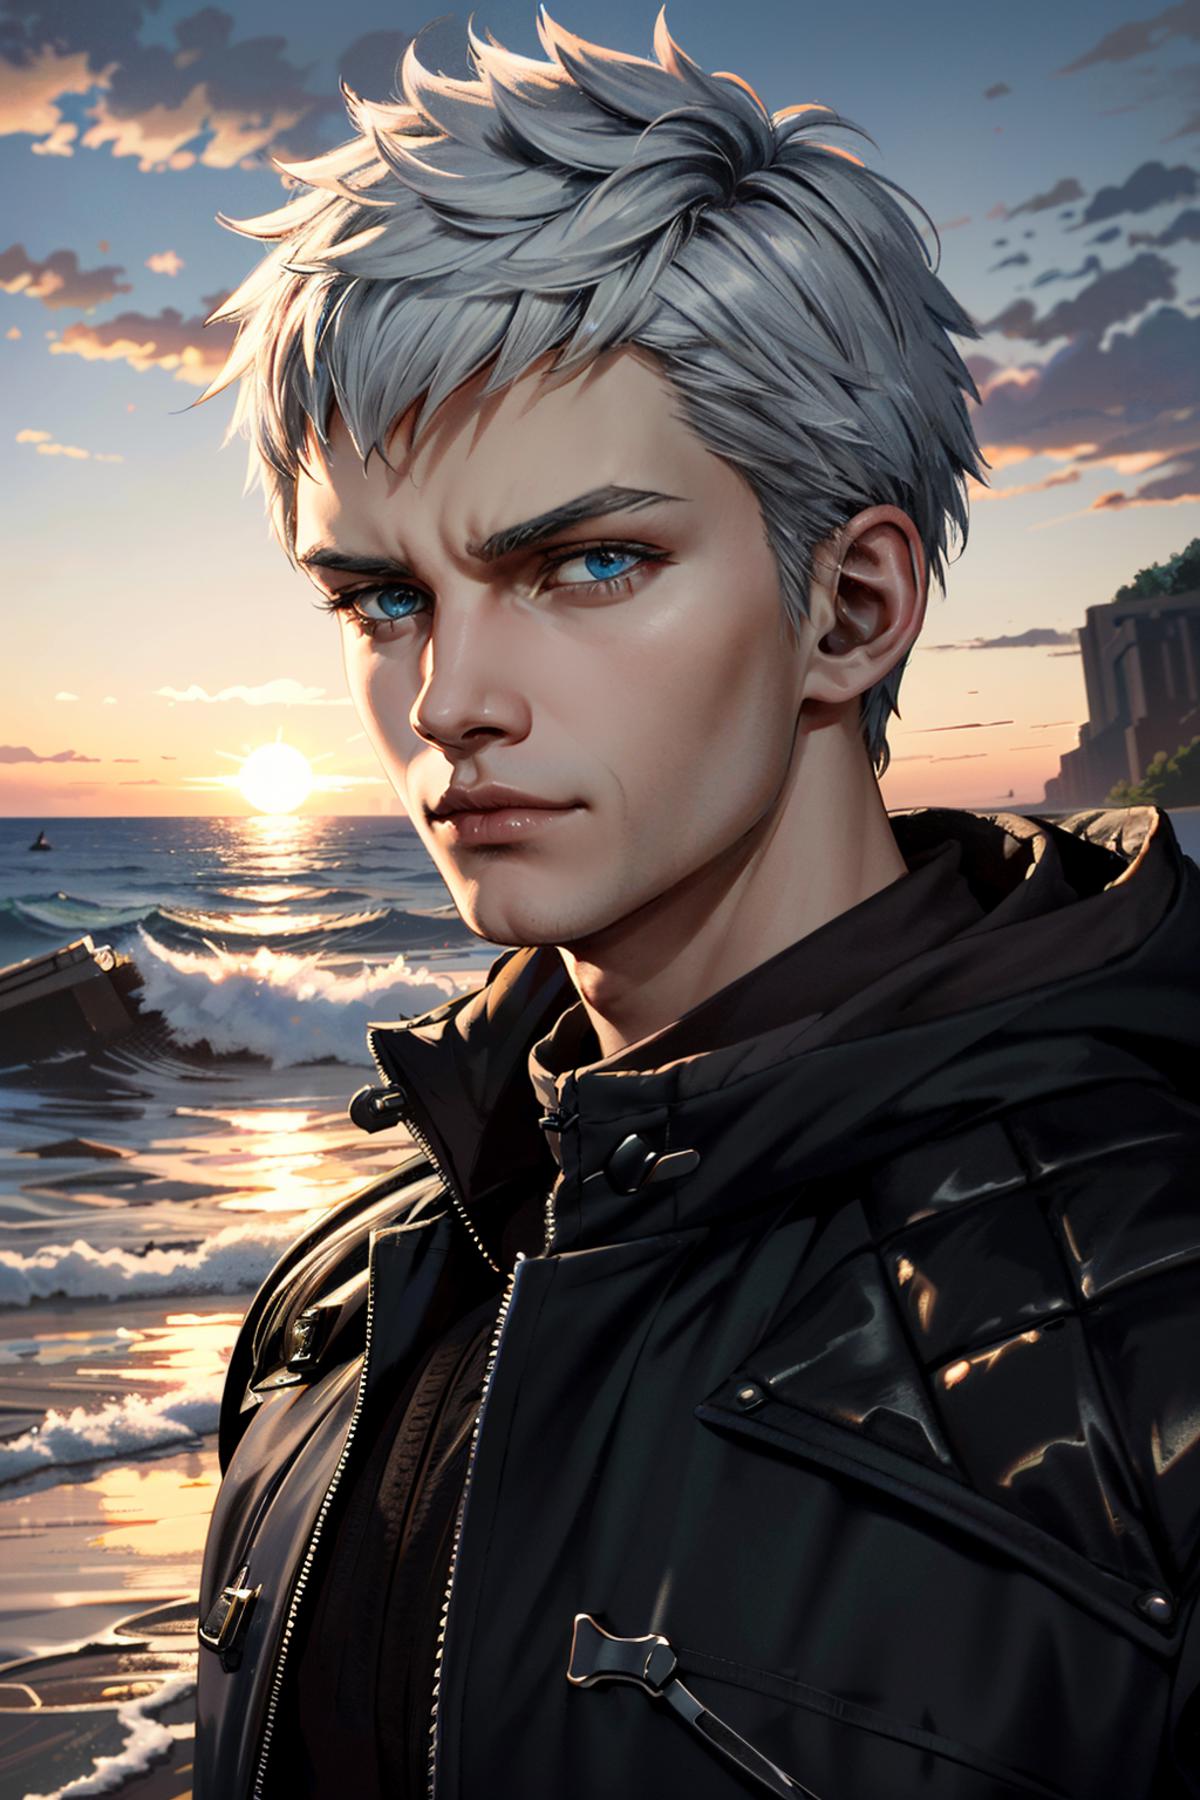 Nero from Devil May Cry 5 image by BloodRedKittie